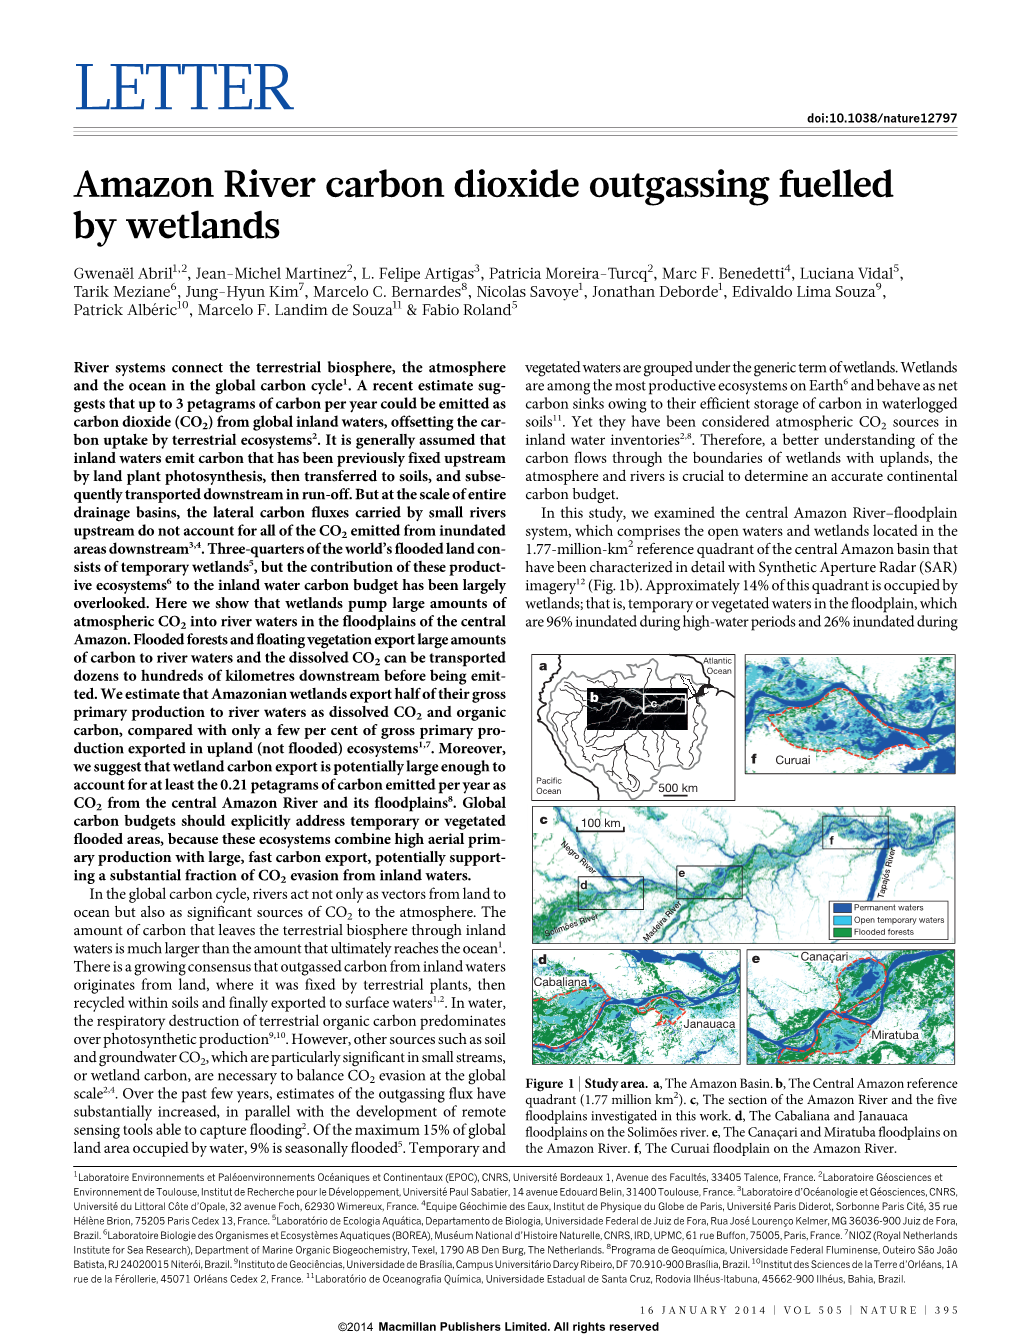 Amazon River Carbon Dioxide Outgassing Fuelled by Wetlands